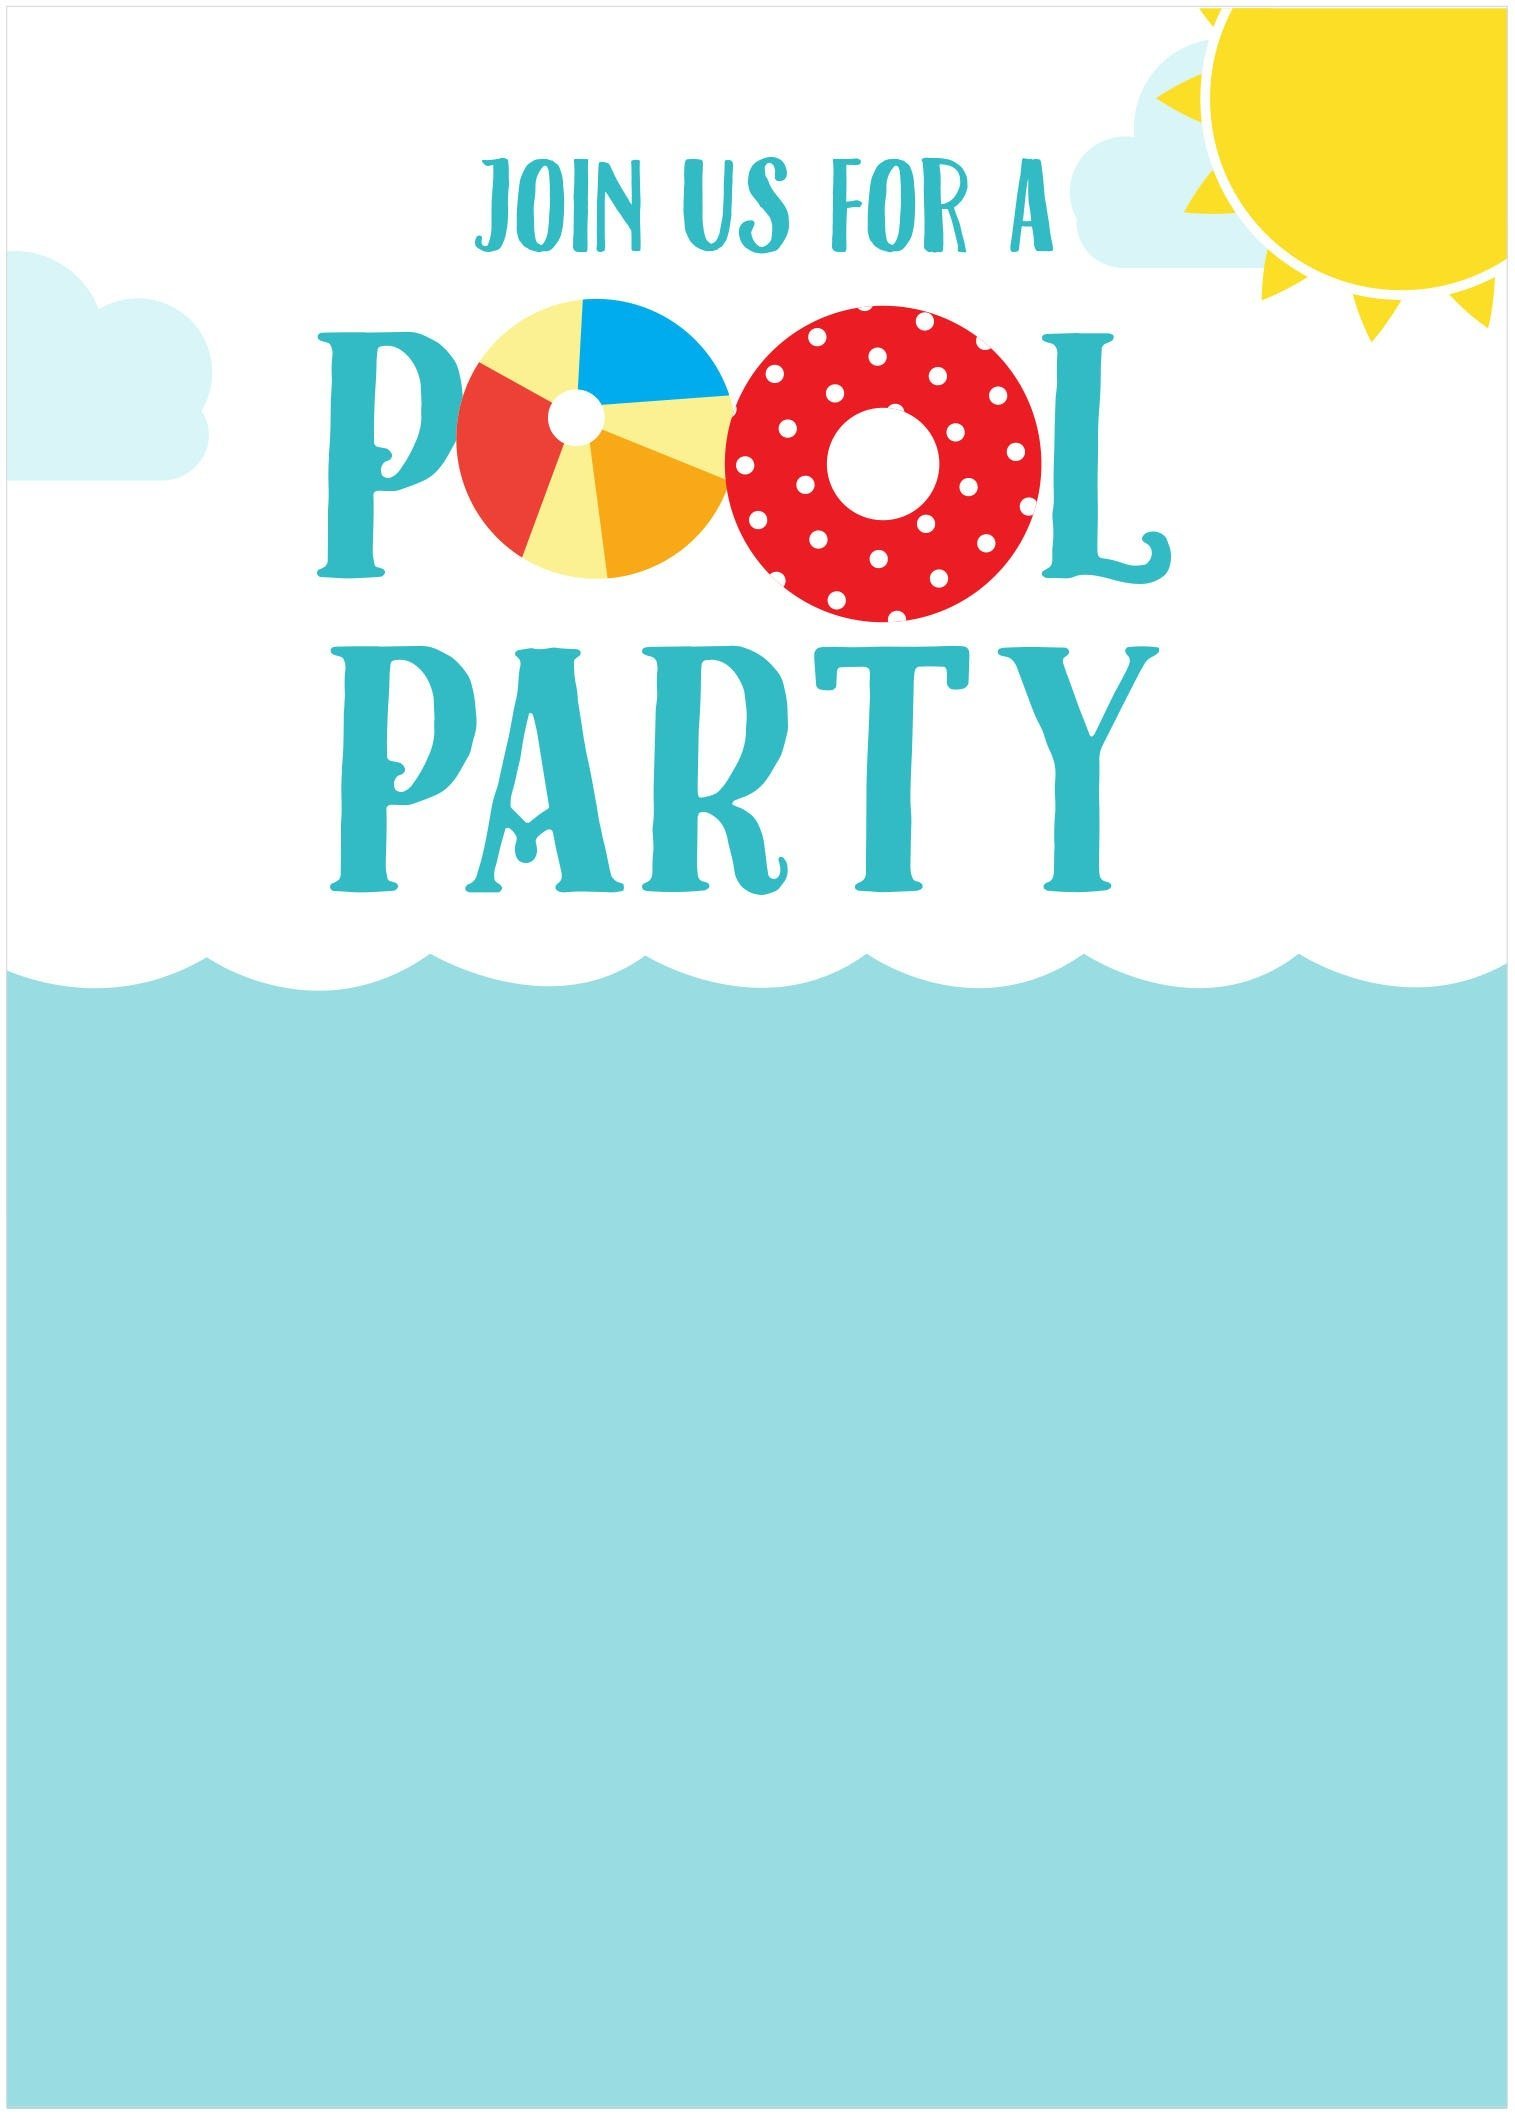 Pool Party Invitations Together With A Picturesque View Of Your